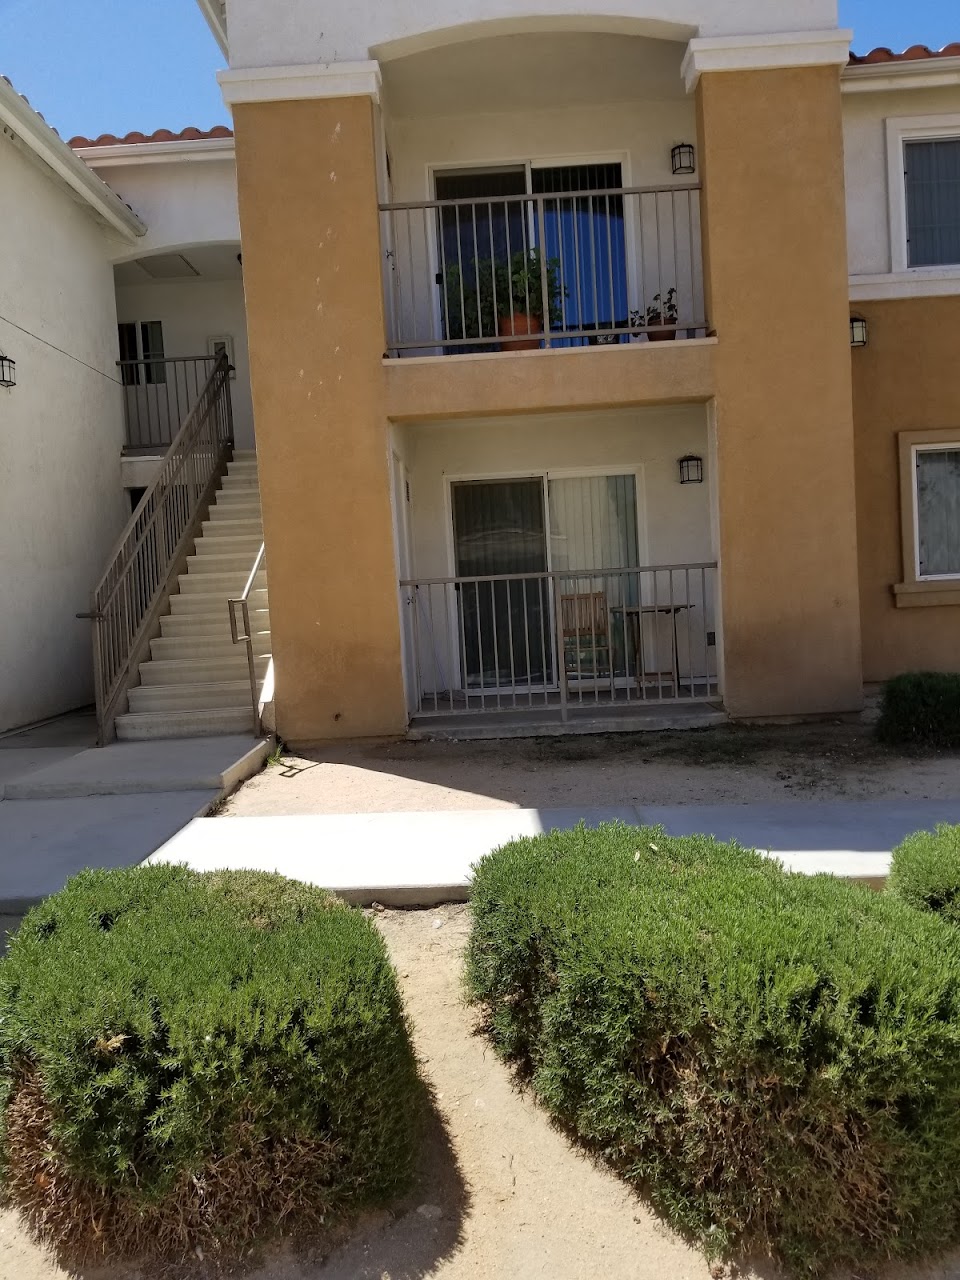 Photo of CASA BELLA APTS 1B. Affordable housing located at 16980 NISQUALLI RD VICTORVILLE, CA 92395